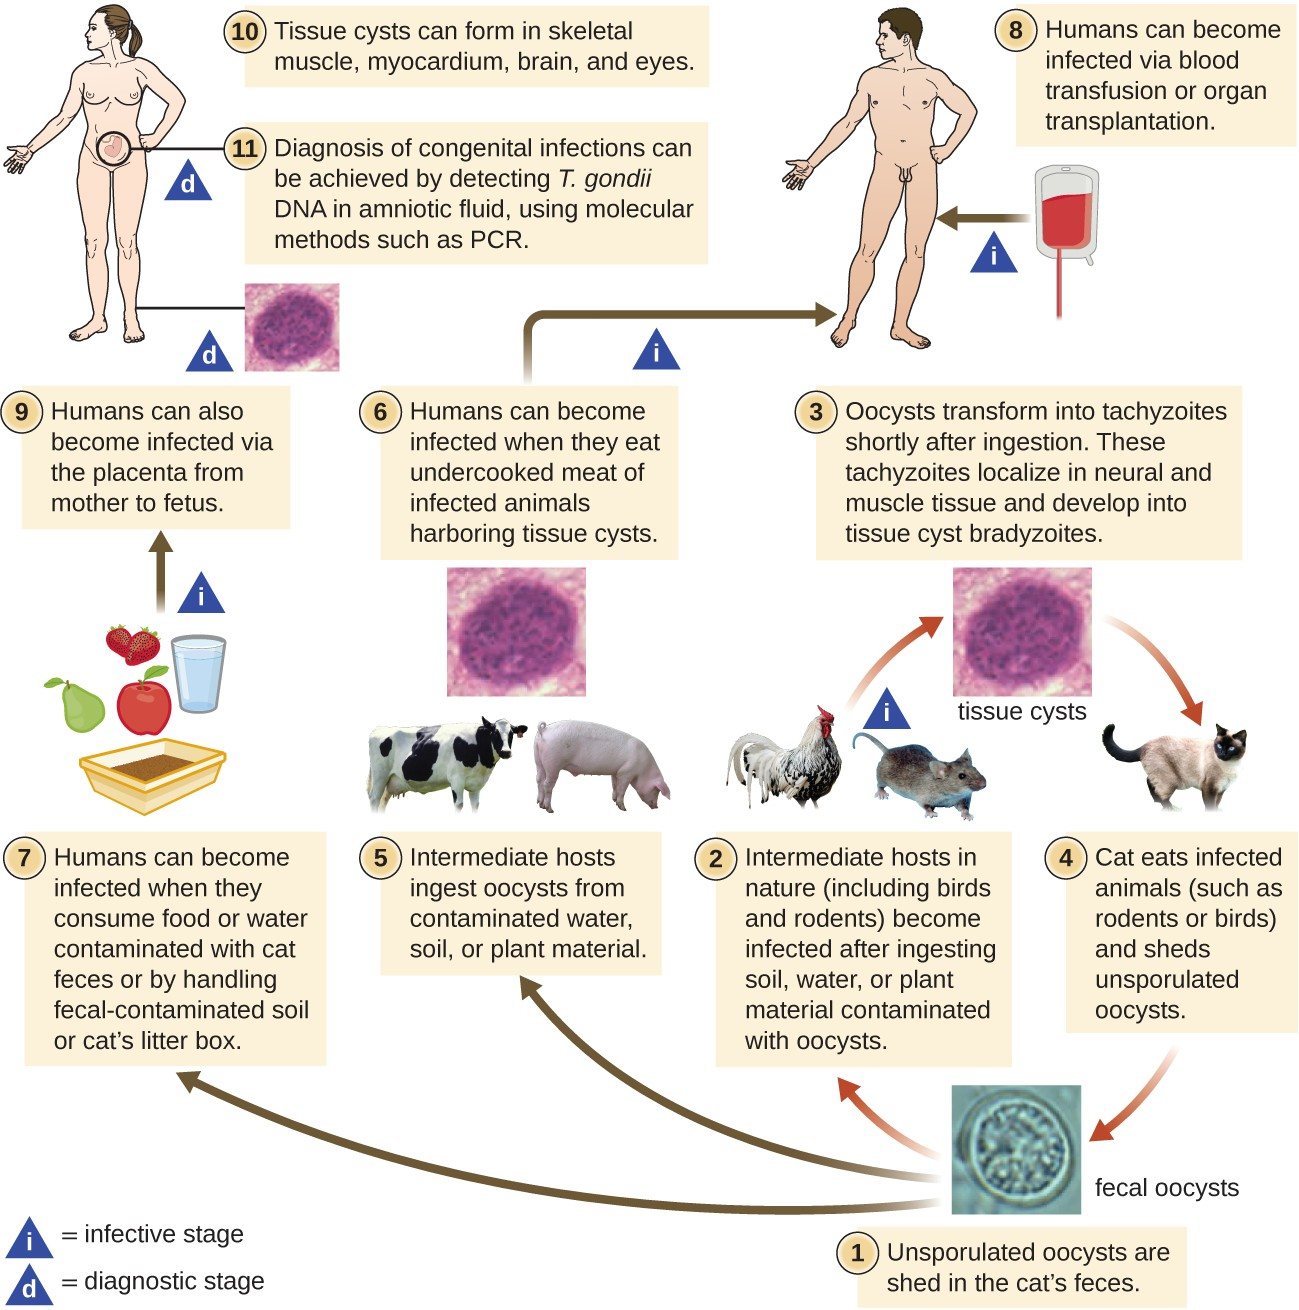 The infectious cycle of Toxoplasma gondii.